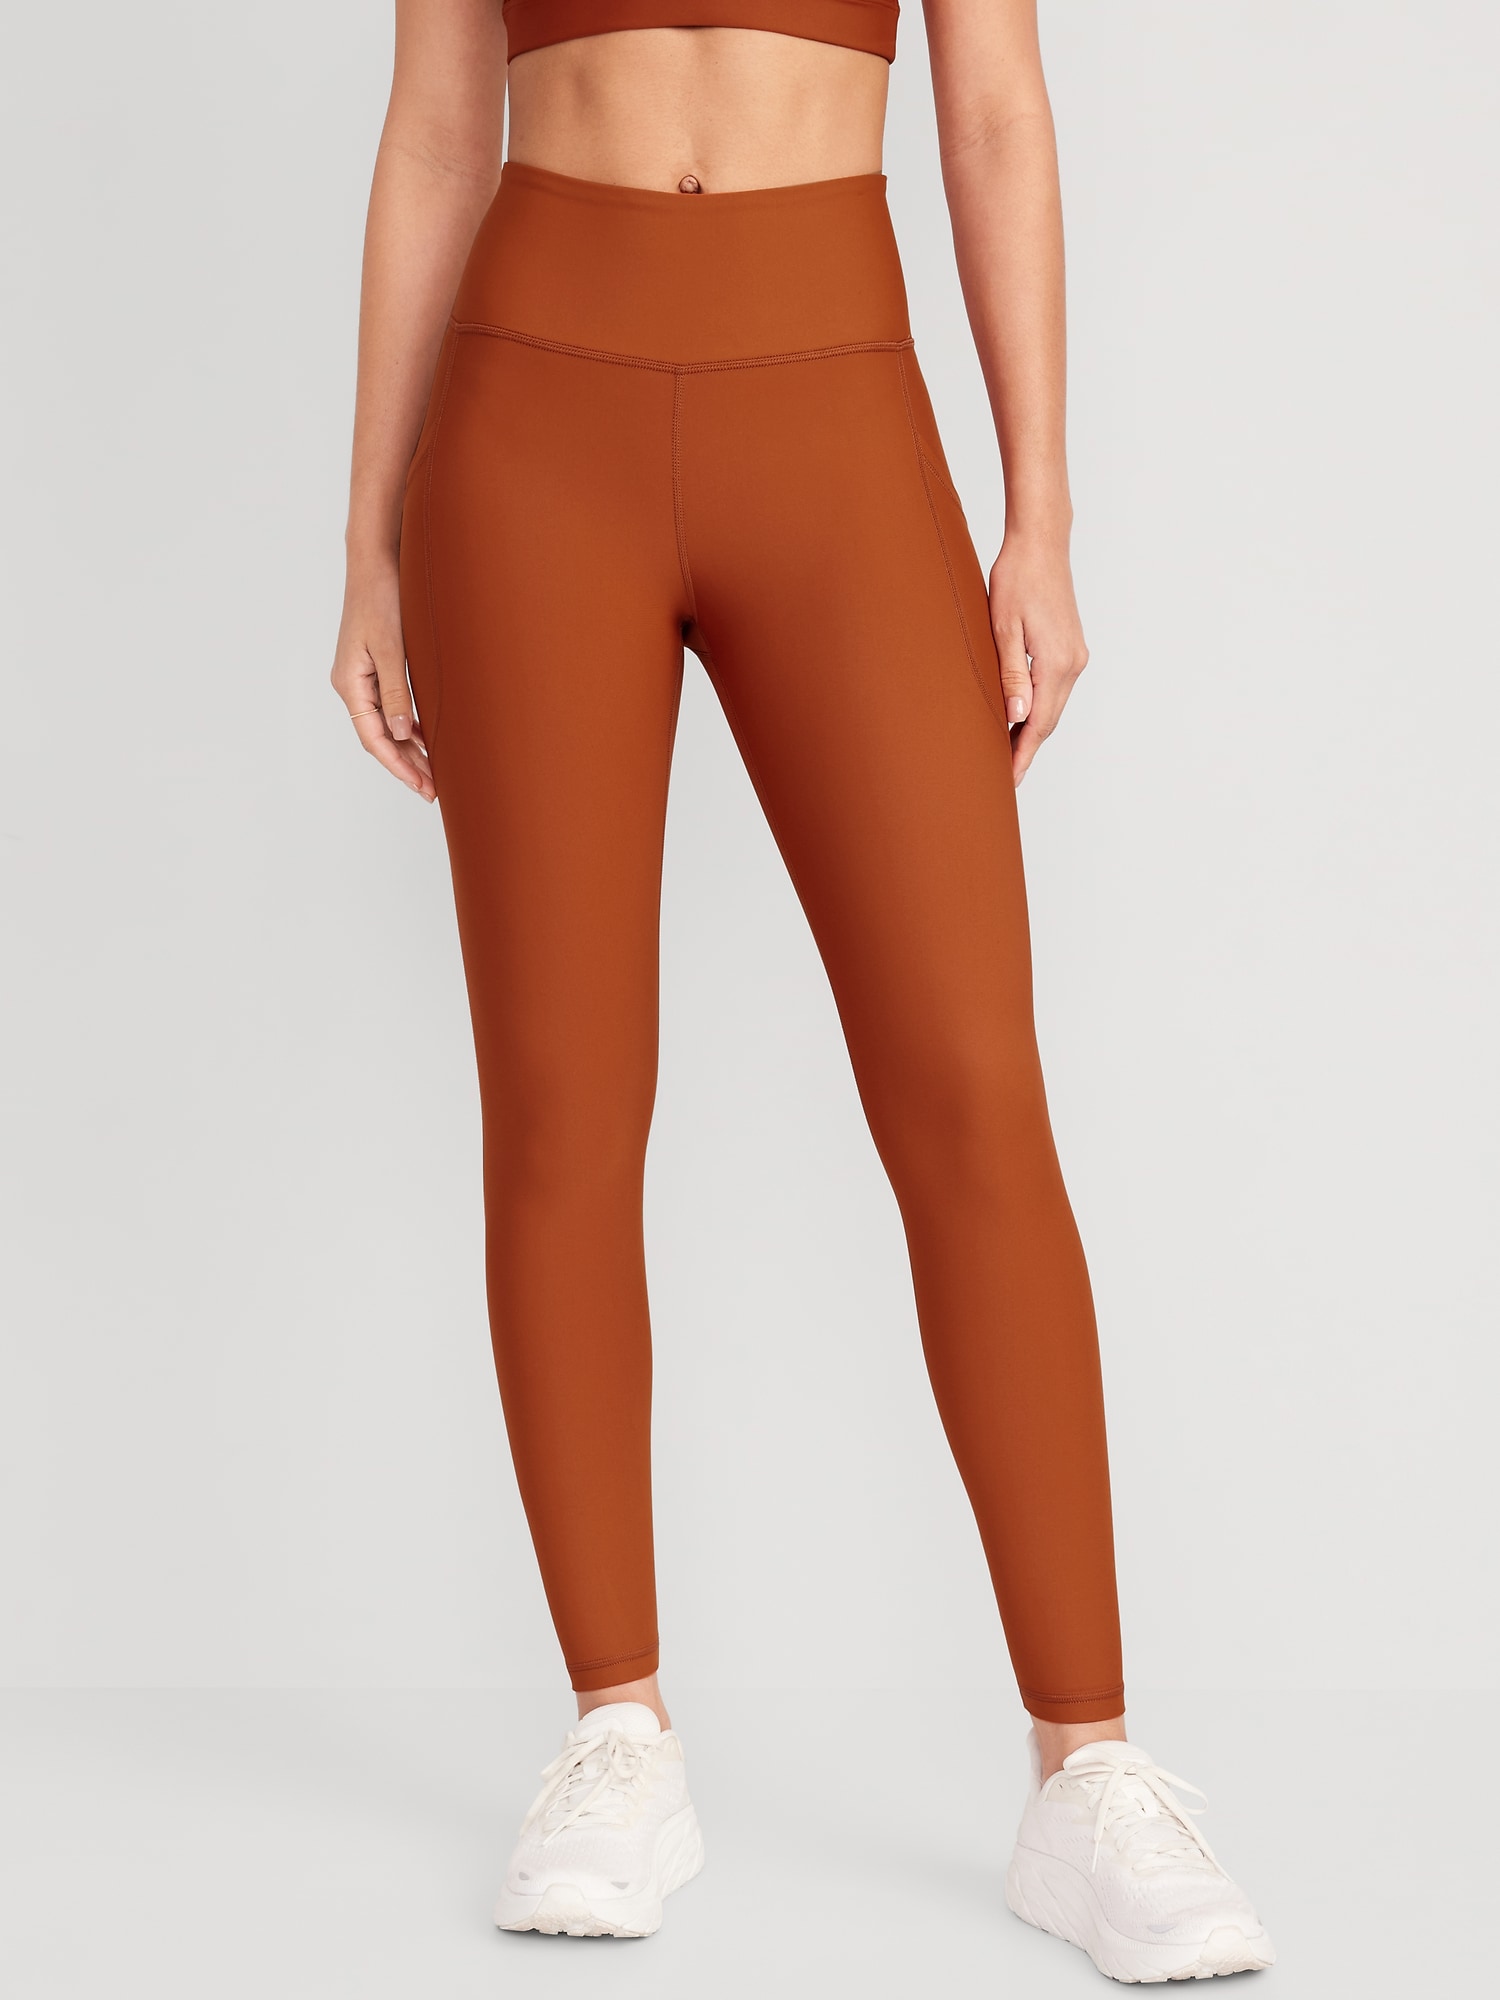 Old Navy Leggings Just $4-$5 Shipped